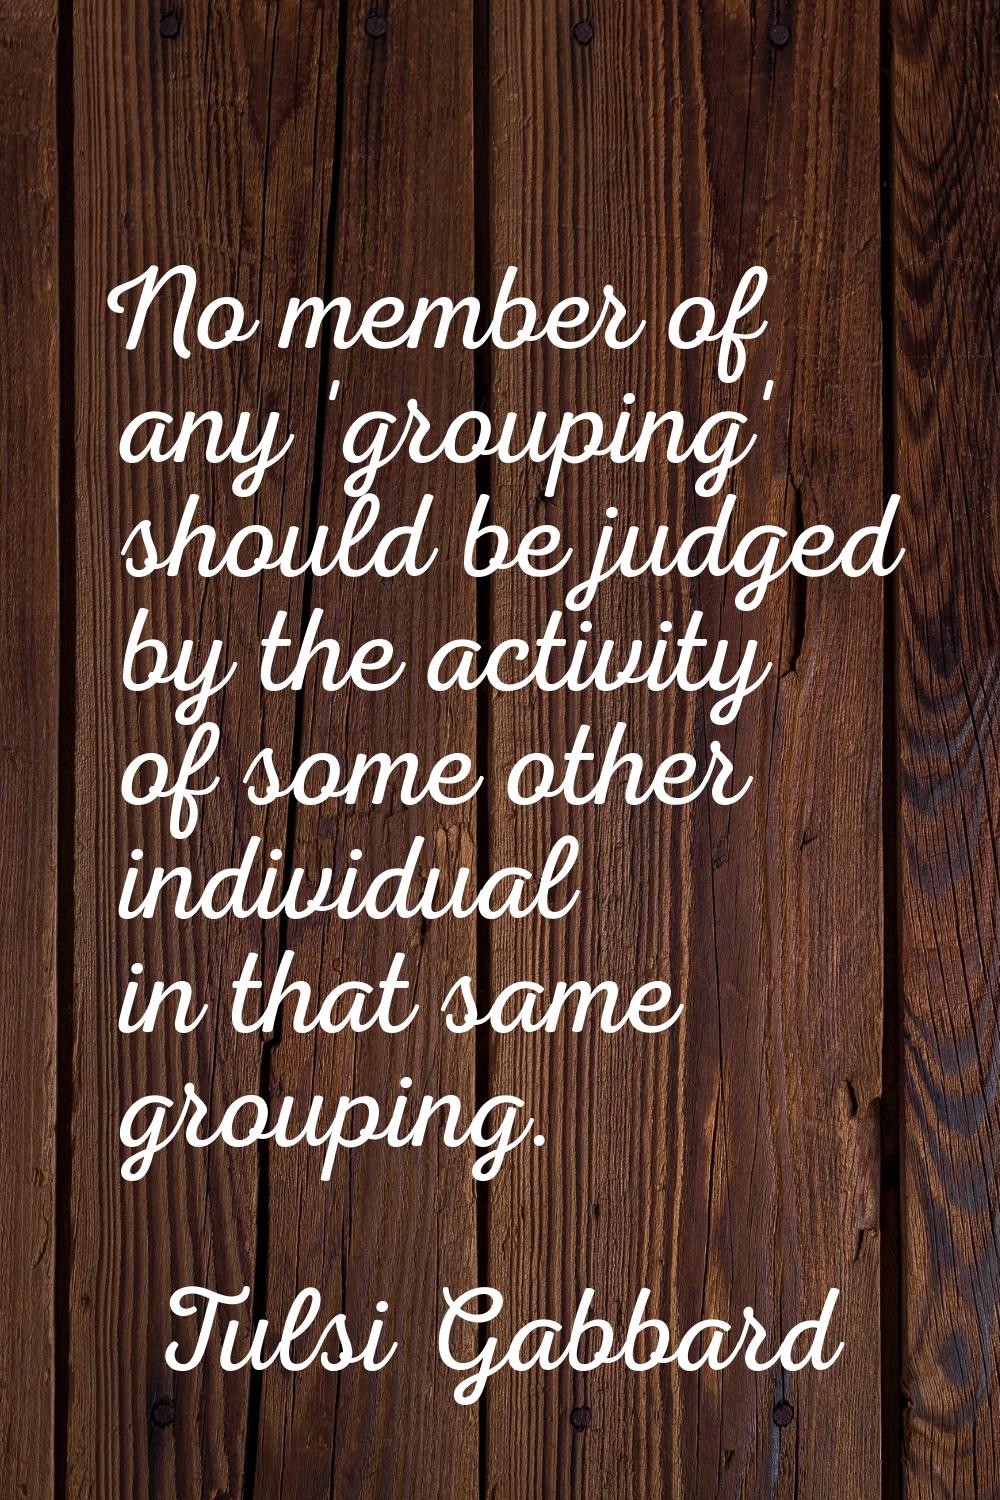 No member of any 'grouping' should be judged by the activity of some other individual in that same 